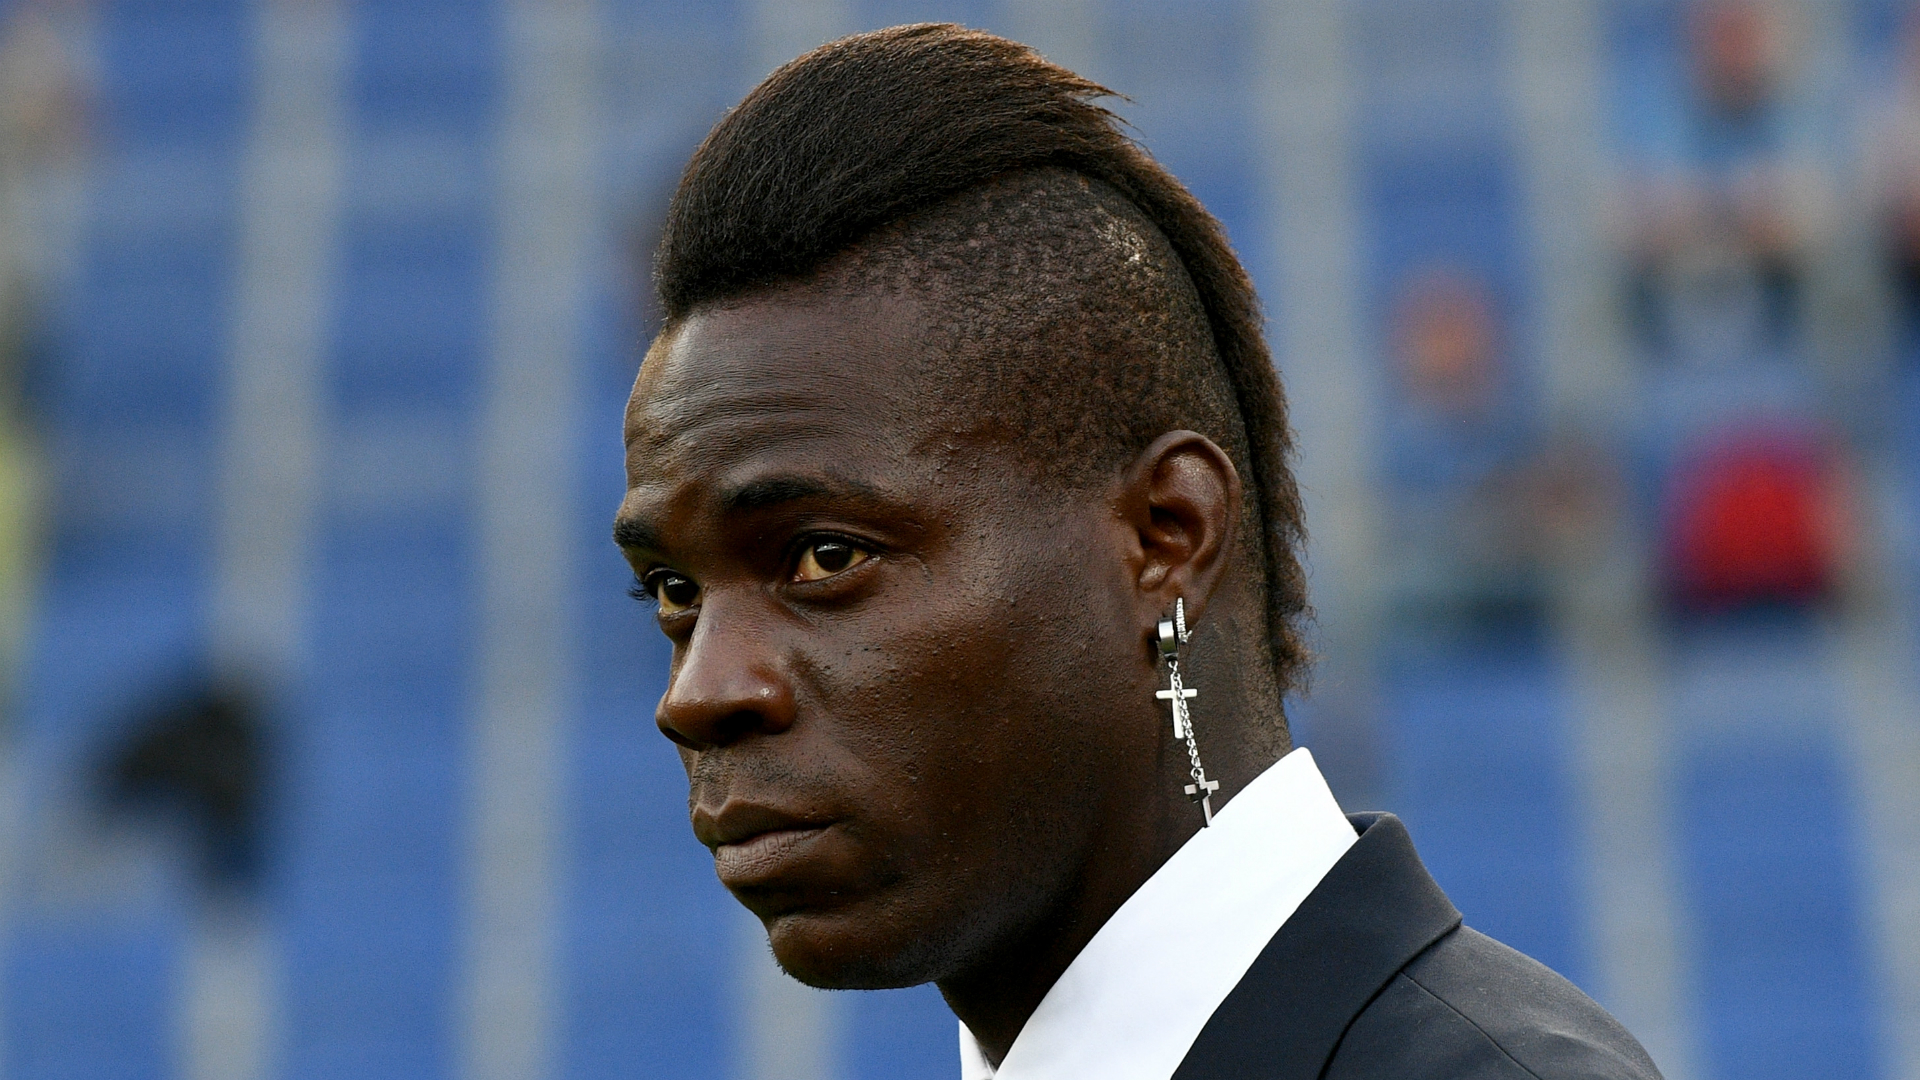 Brescia secured the signing of Italy international Mario Balotelli after earning promotion and the striker's mother got emotional.